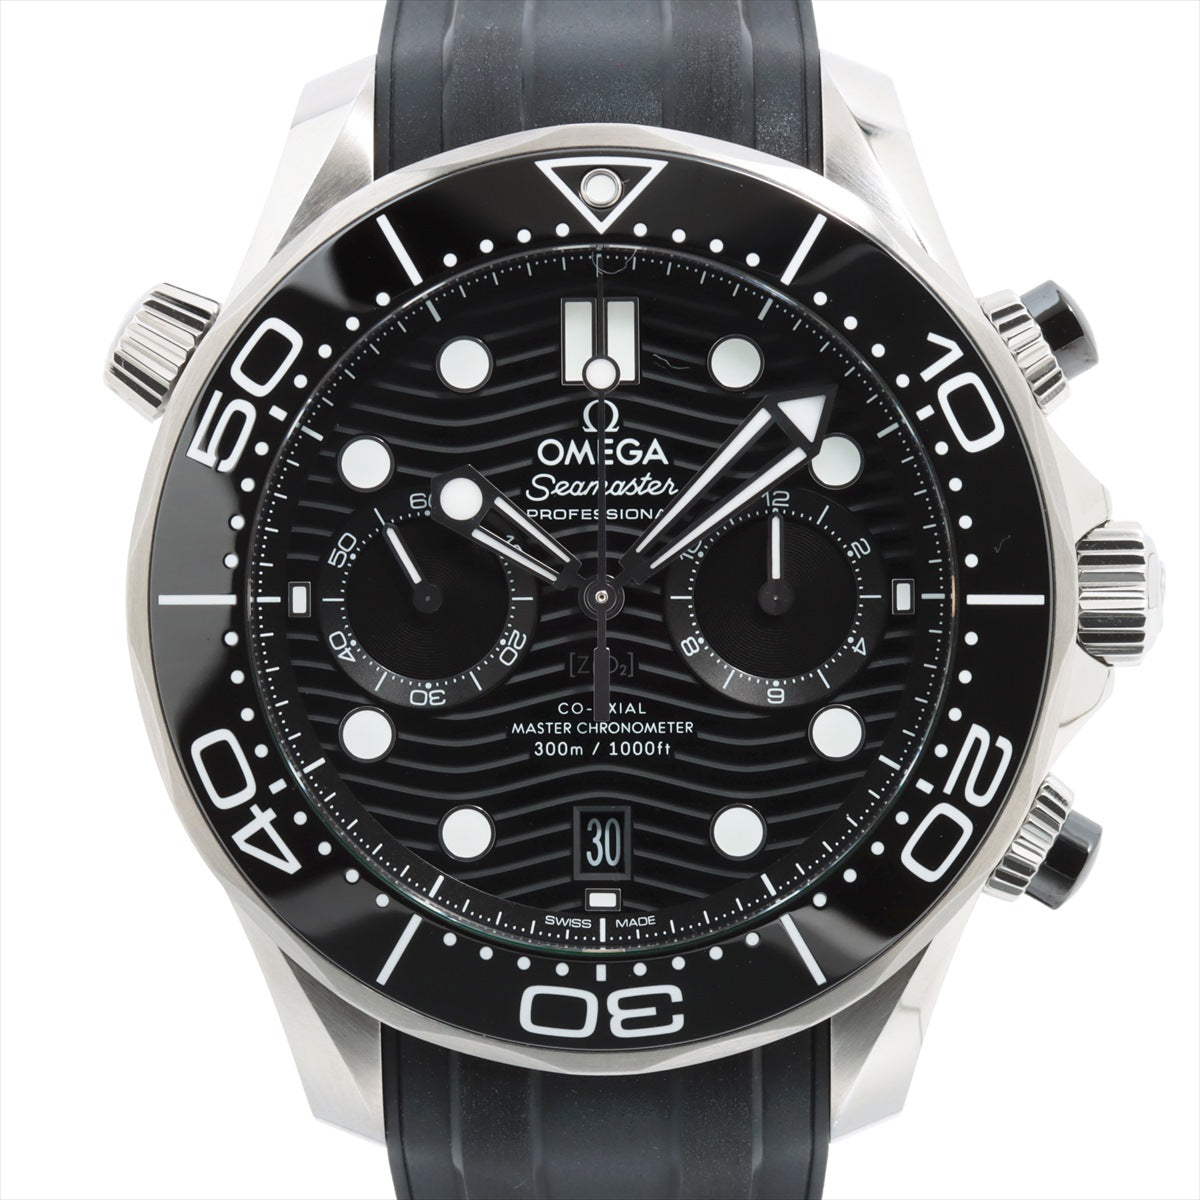 Omega Seamaster Diver 300 Co-Axial Master chronometer Chronograph 210.32.44.51.01.001 CE × SS × rubber AT Black Dial